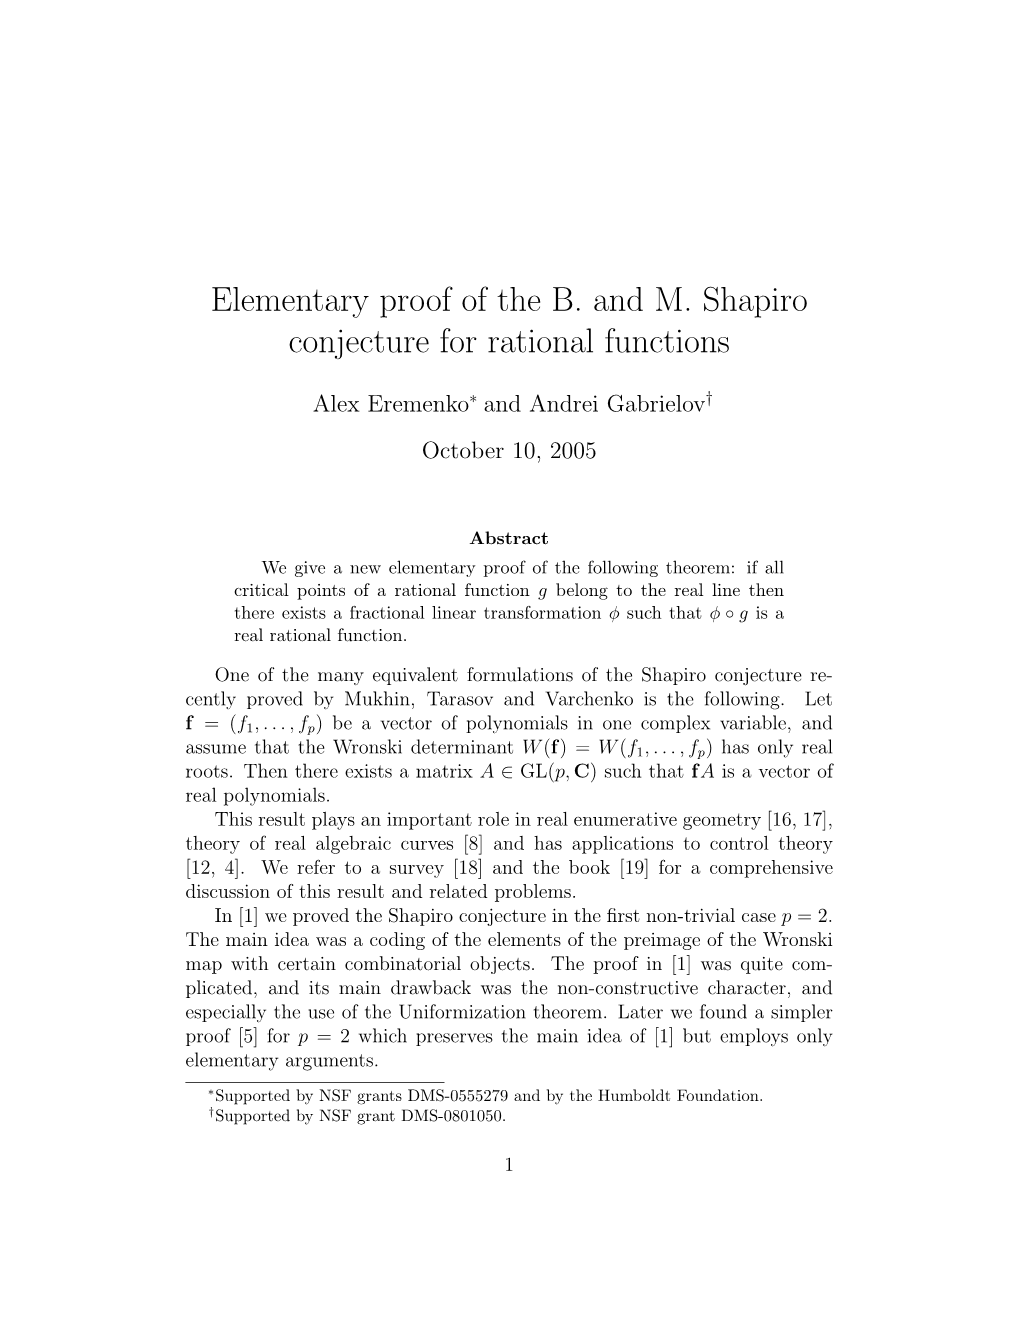 Elementary Proof of the B. and M. Shapiro Conjecture for Rational Functions